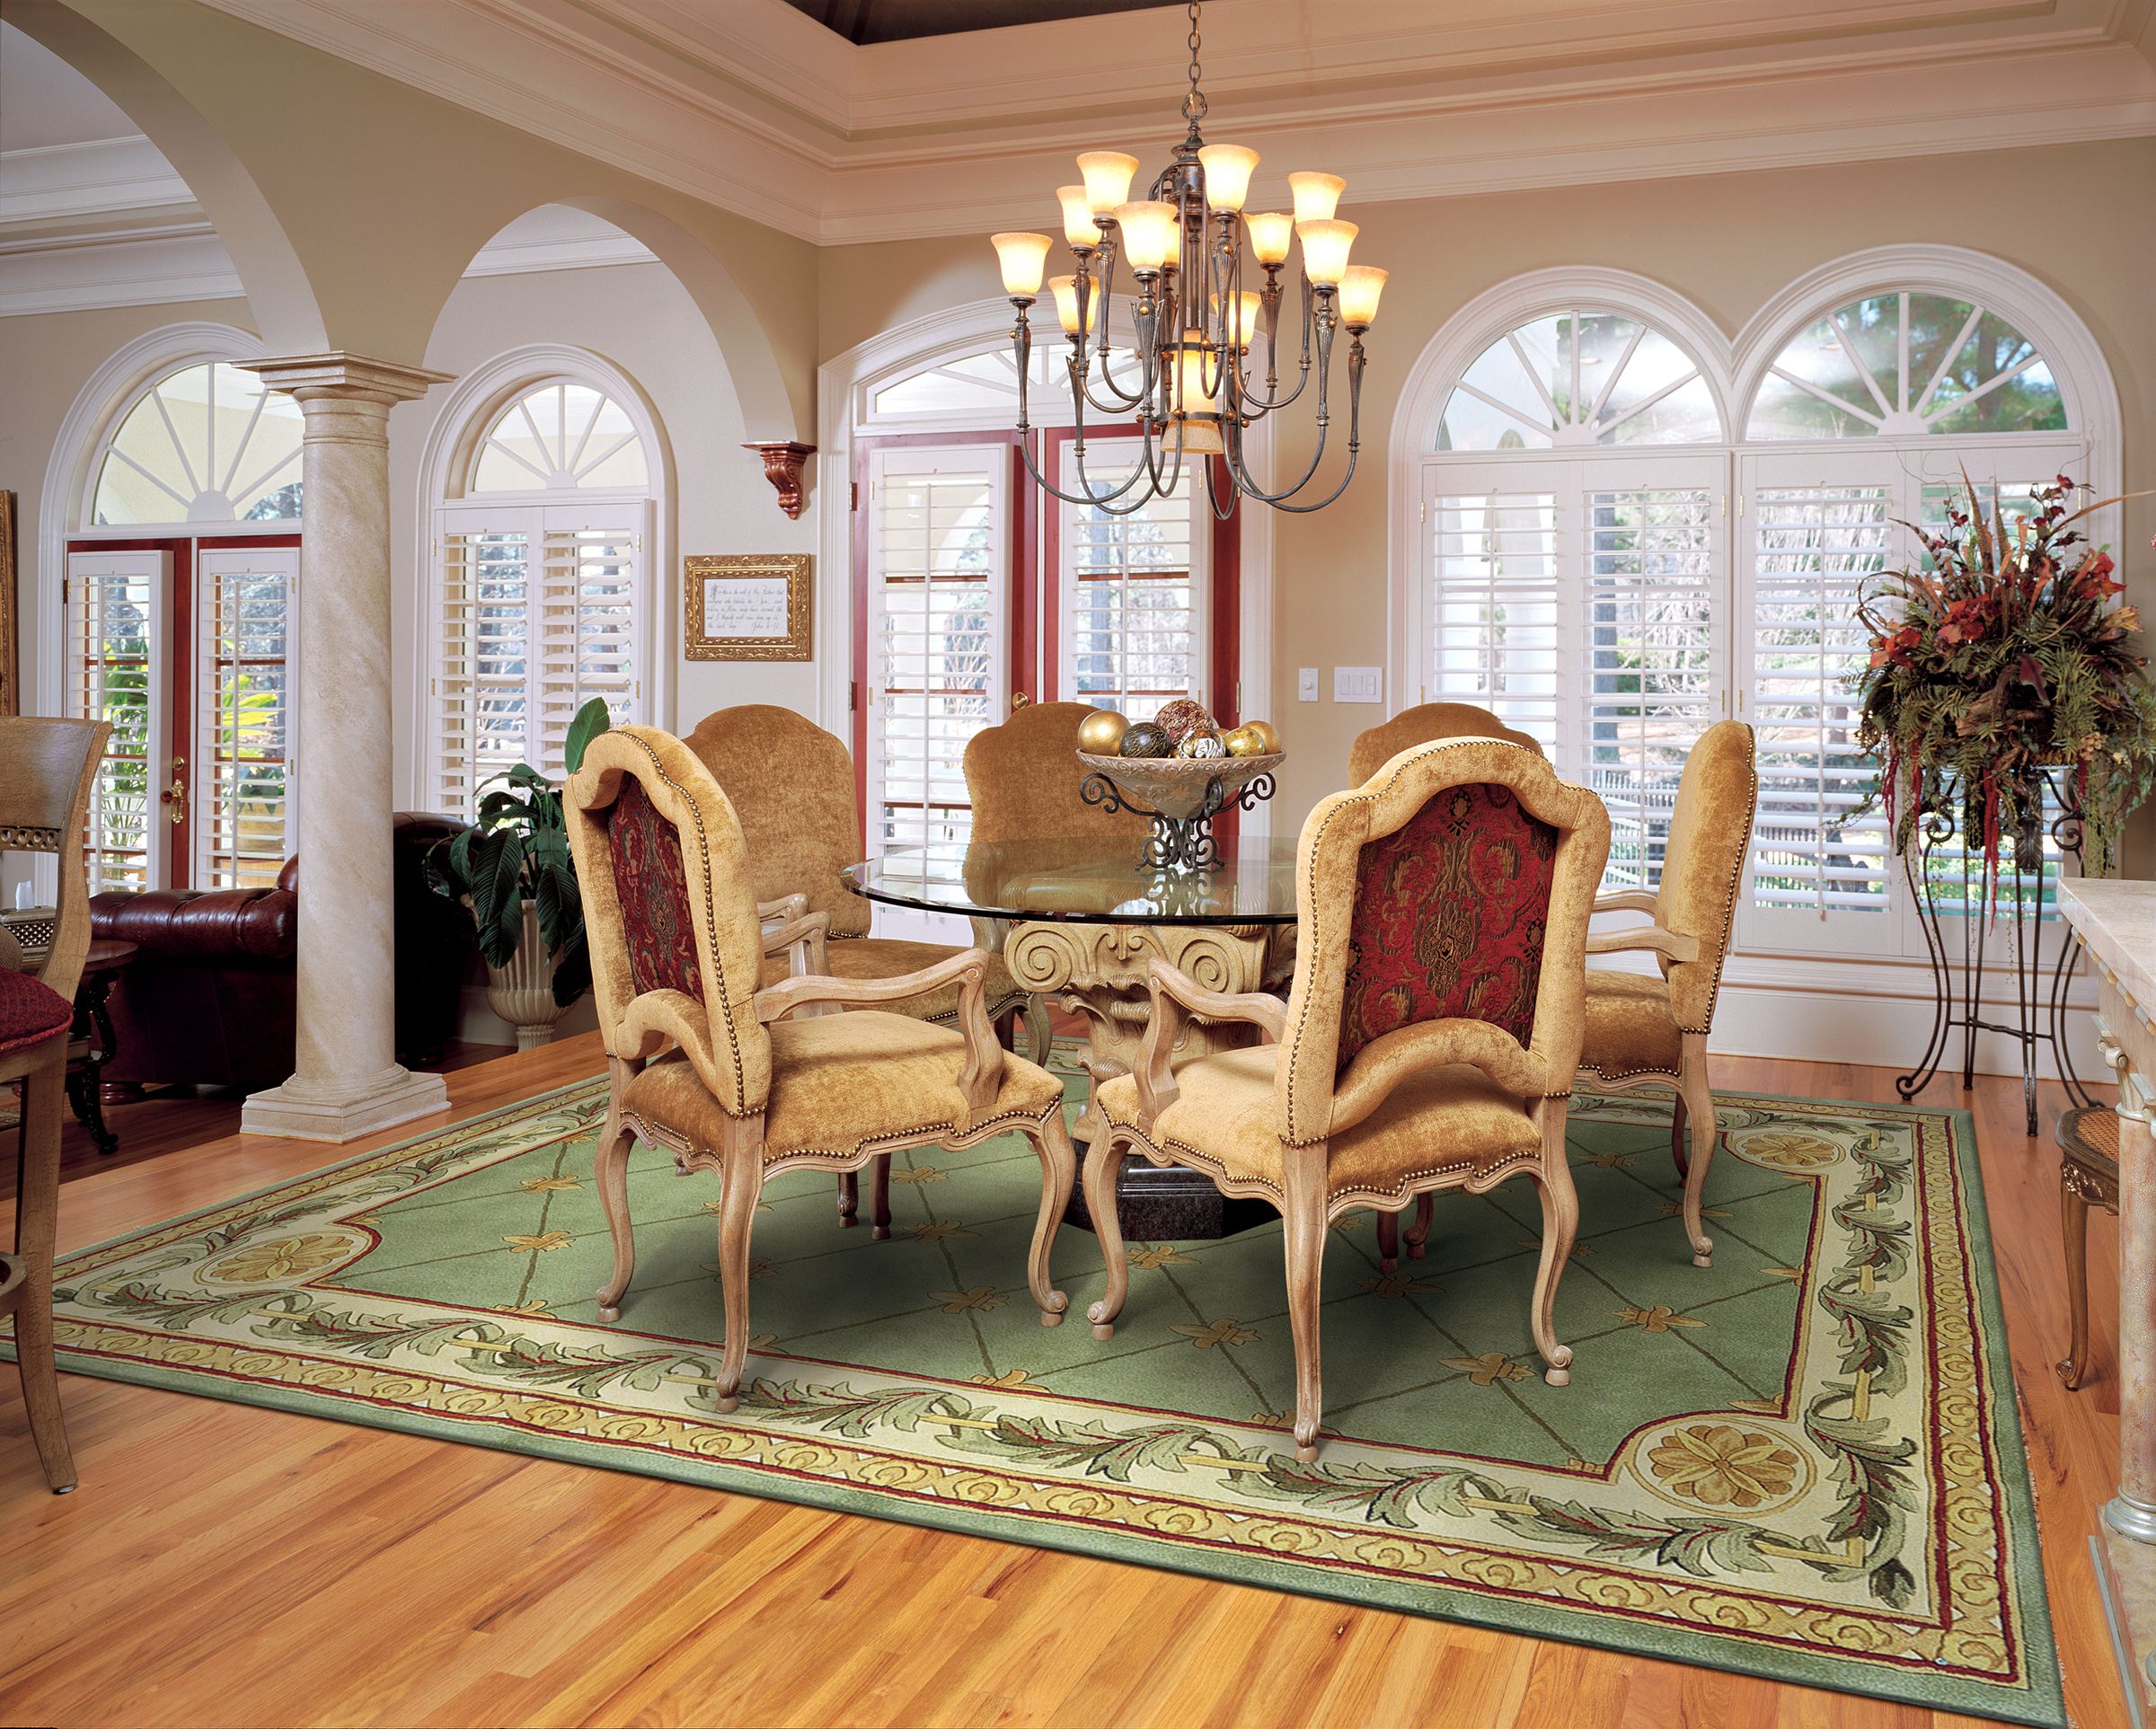 Dining Room Round Unique Dining Room Rug Supporting Round Glass Table Brightened By Branched Lamp In Traditional House Image Dining Room Dining Room Rug With Cozy Room Settings